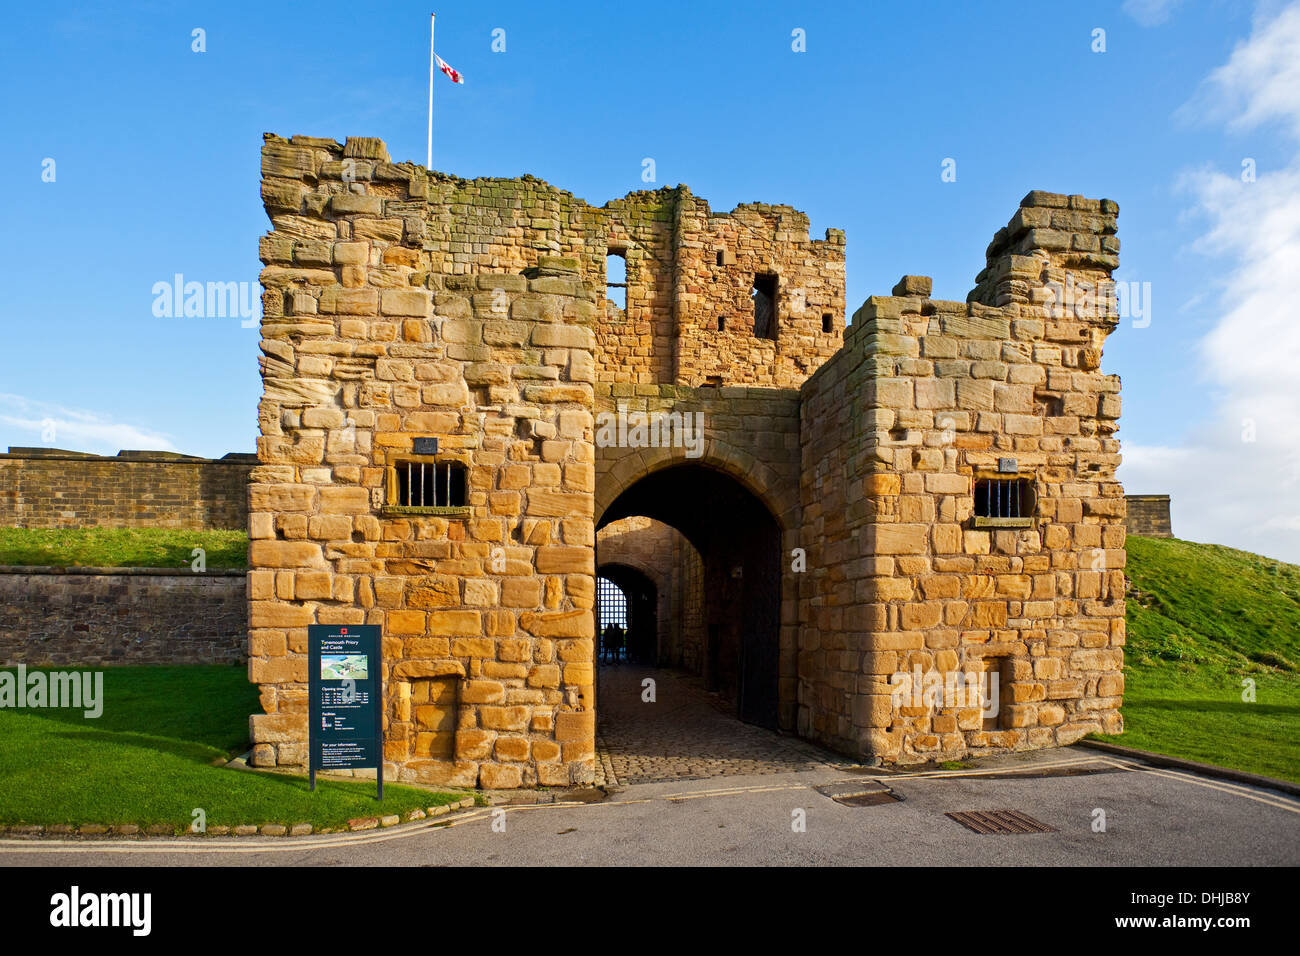 Tynemouth Castle Tyneside, UK Banque D'Images